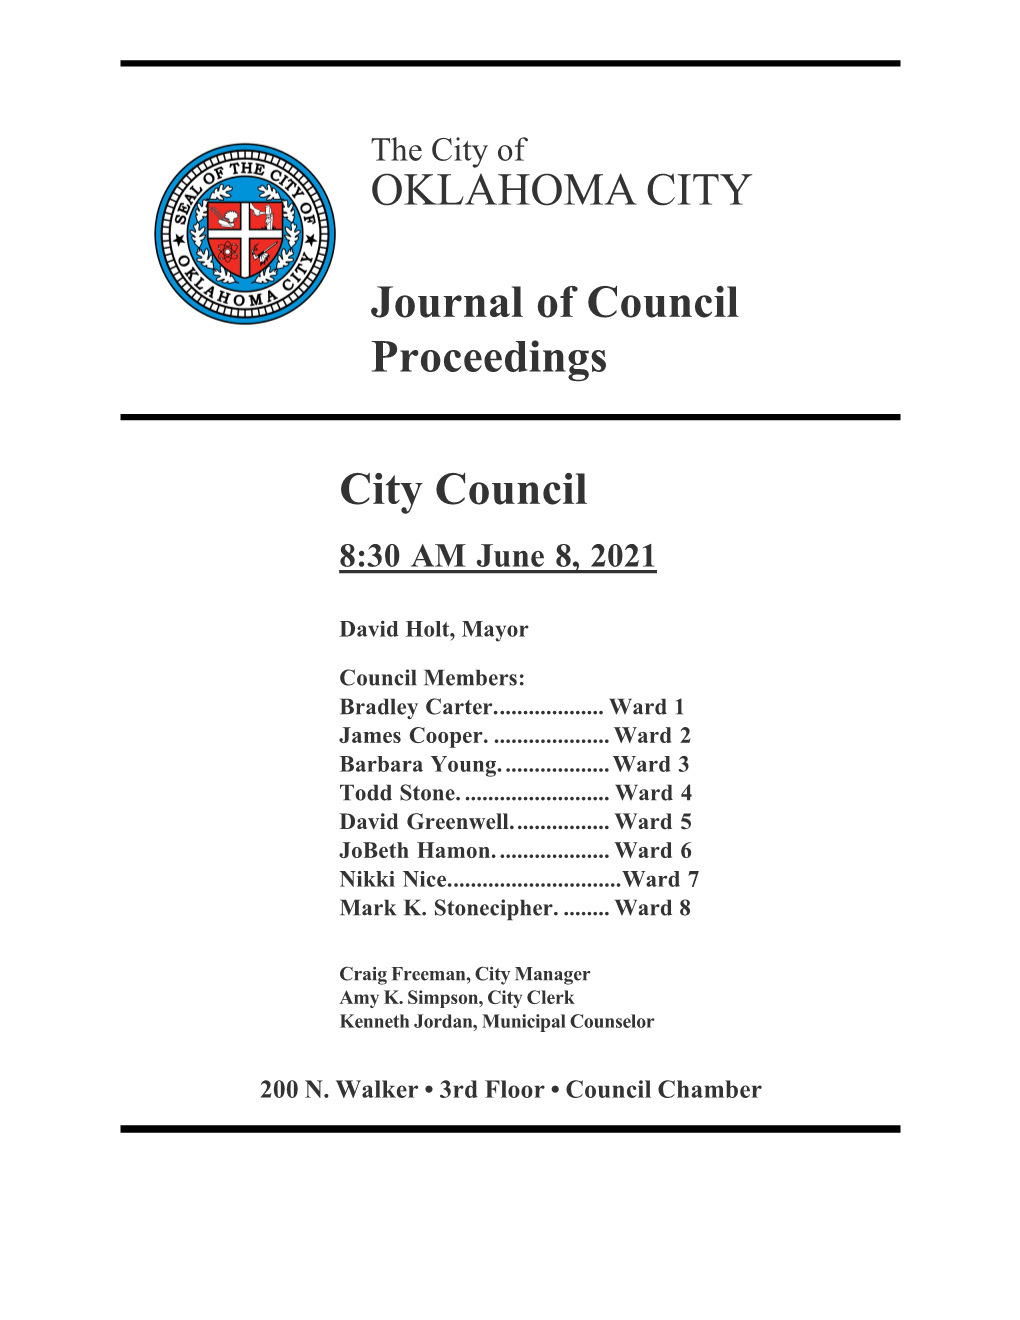 Oklahoma City Journal of Council Proceedings City Council June 8, 2021